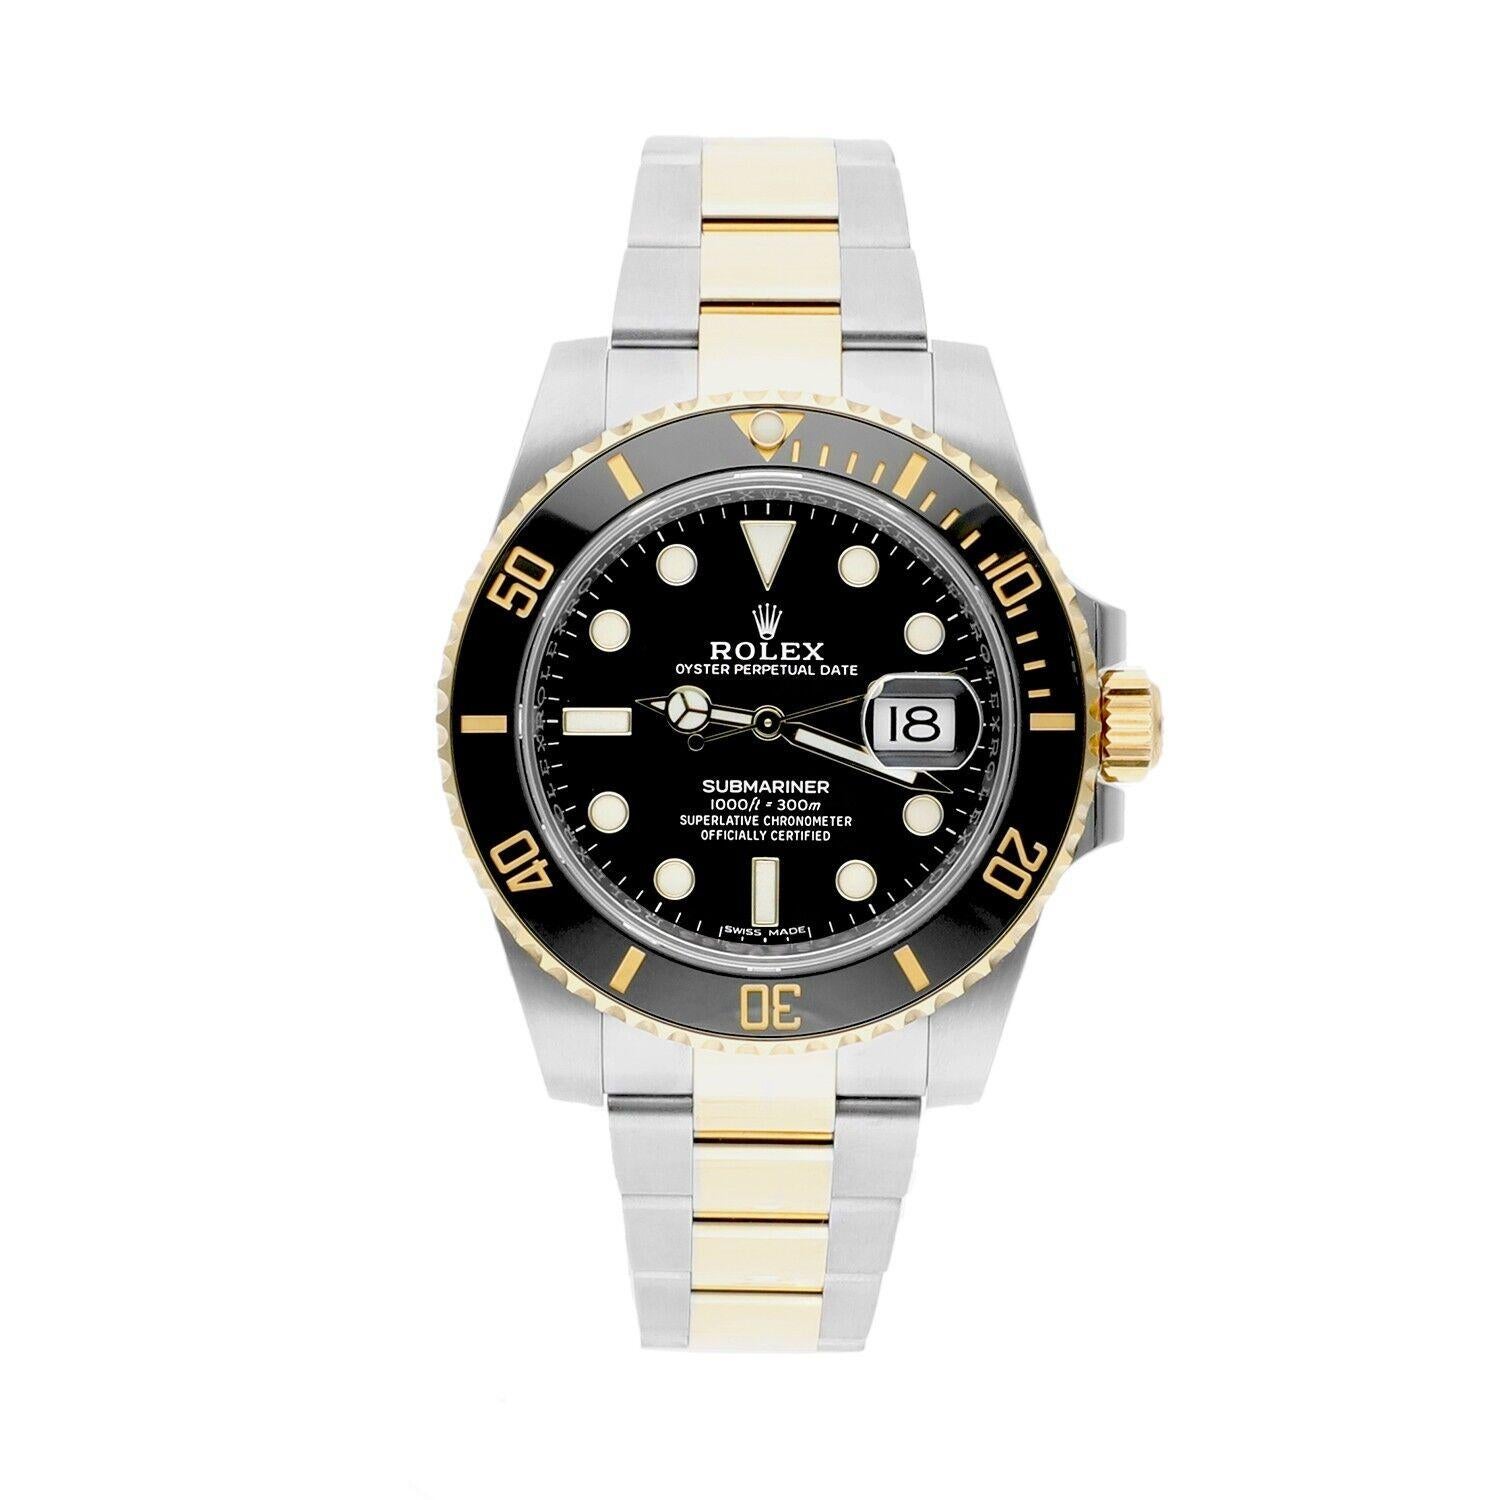 MINT CONDITION Rolex Submariner Date 116613LN Black Dial 18k Gold/Steel, Ceramic Bezel, Complete Watch

This watch has been professionally polished, serviced and is in excellent overall condition. There are absolutely no visible scratches or